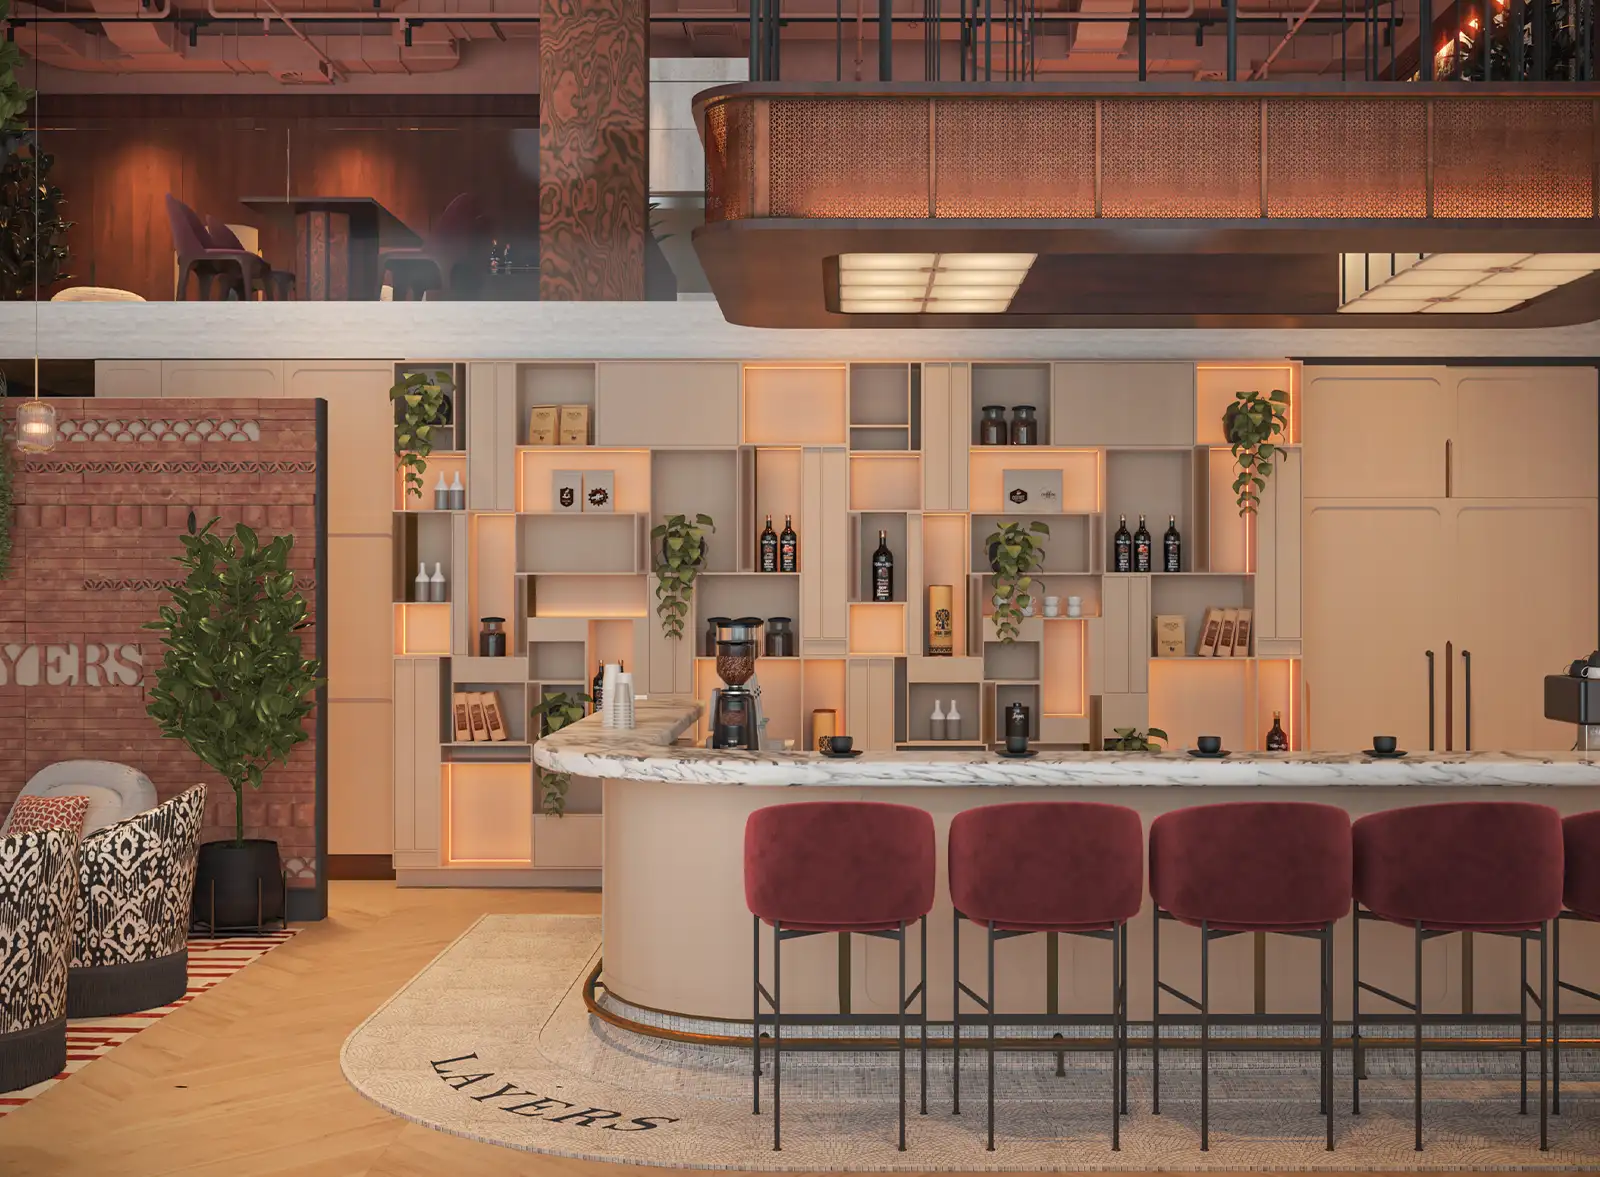 Contemporary lounge interior with a marble-topped bar, velvet bar stools, and bespoke shelving filled with curated coffee and decor, illuminated by warm lighting against a backdrop of brick and wooden textures, inviting a relaxed yet upscale coffee experience.